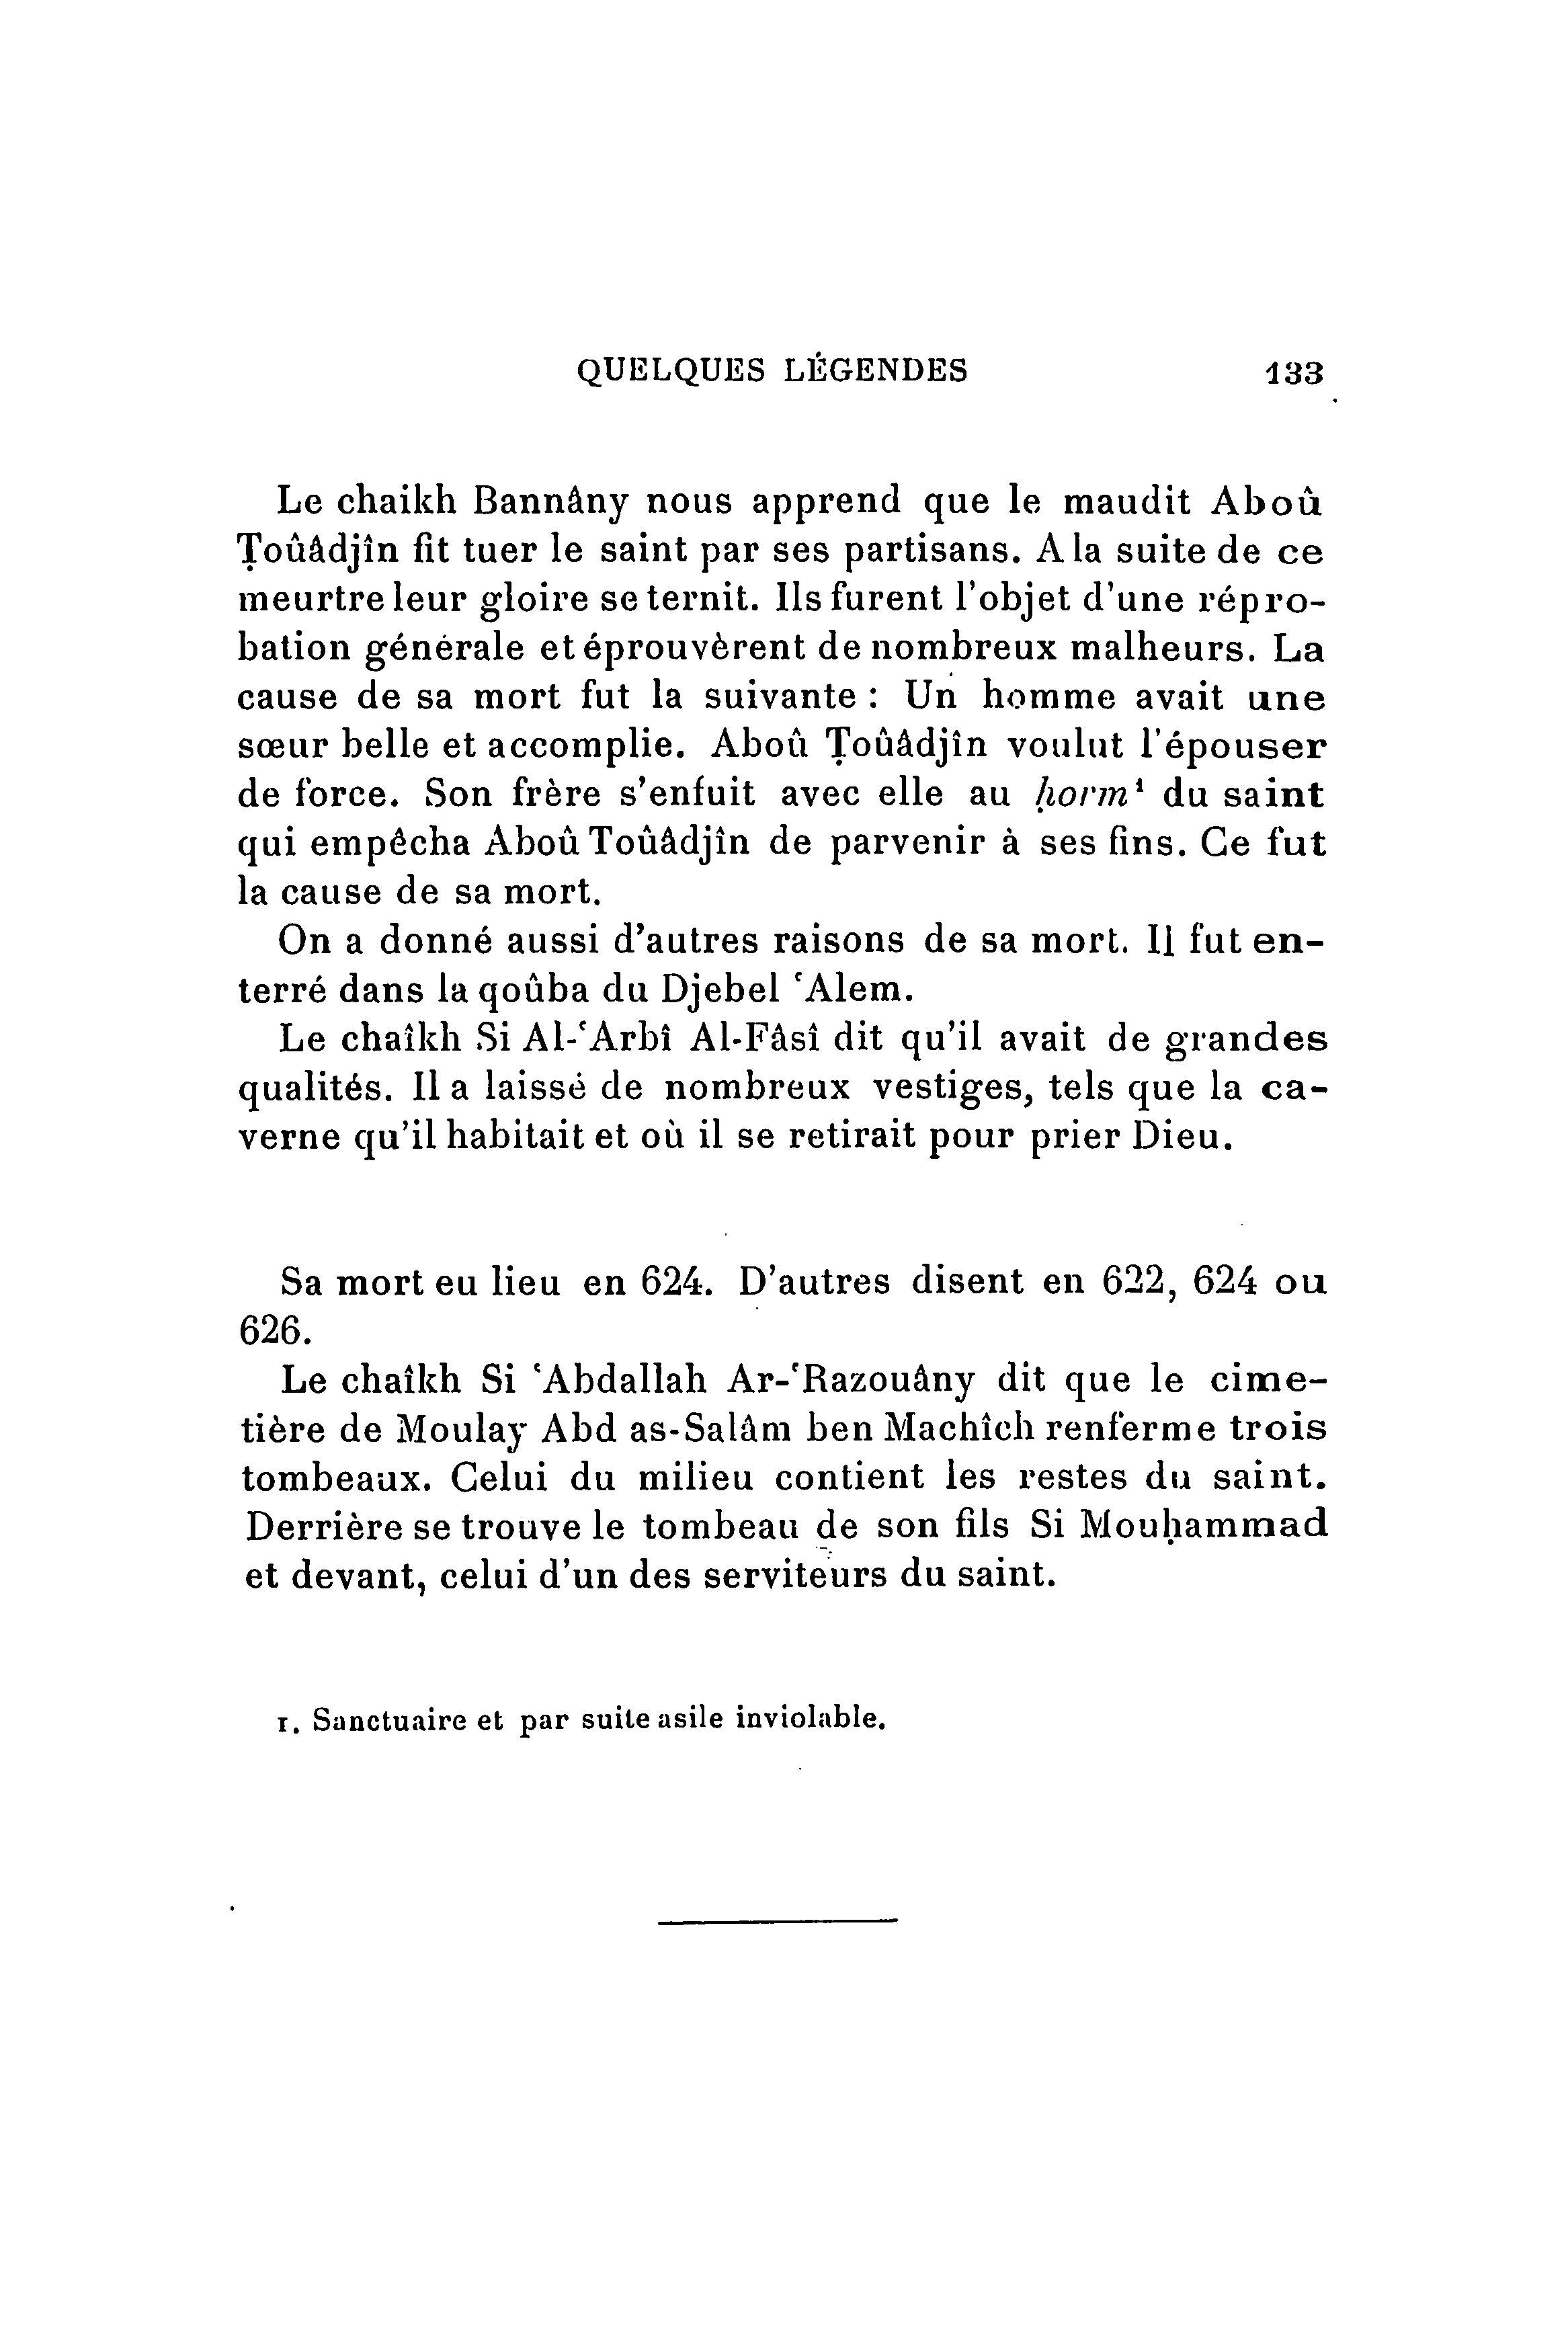 archives-marocaines-volume-03-1905_page_140